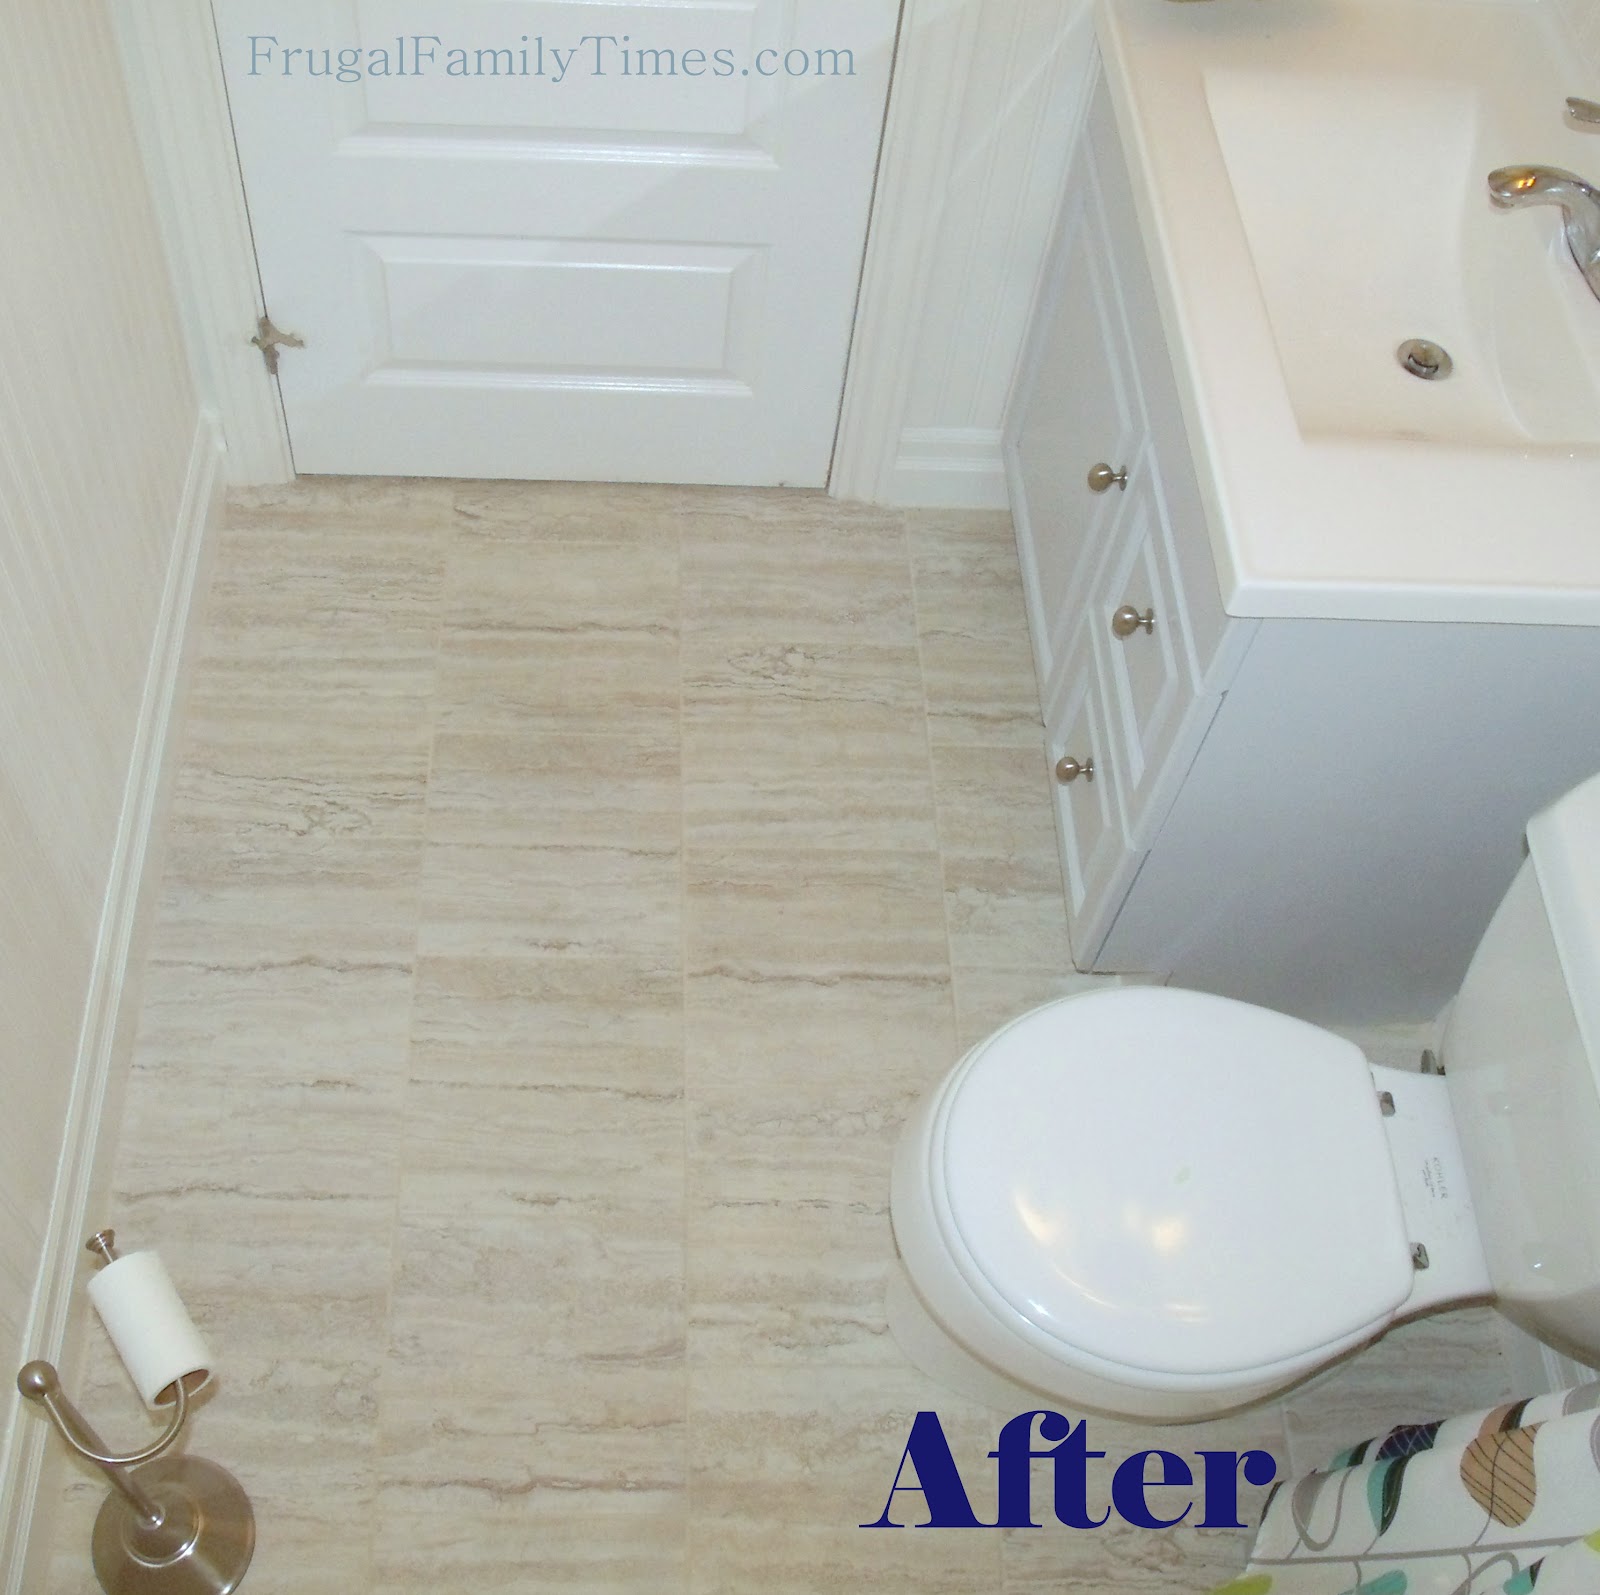 ... Times: How to Install Peel and Stick Vinyl Tile (That You Can Grout